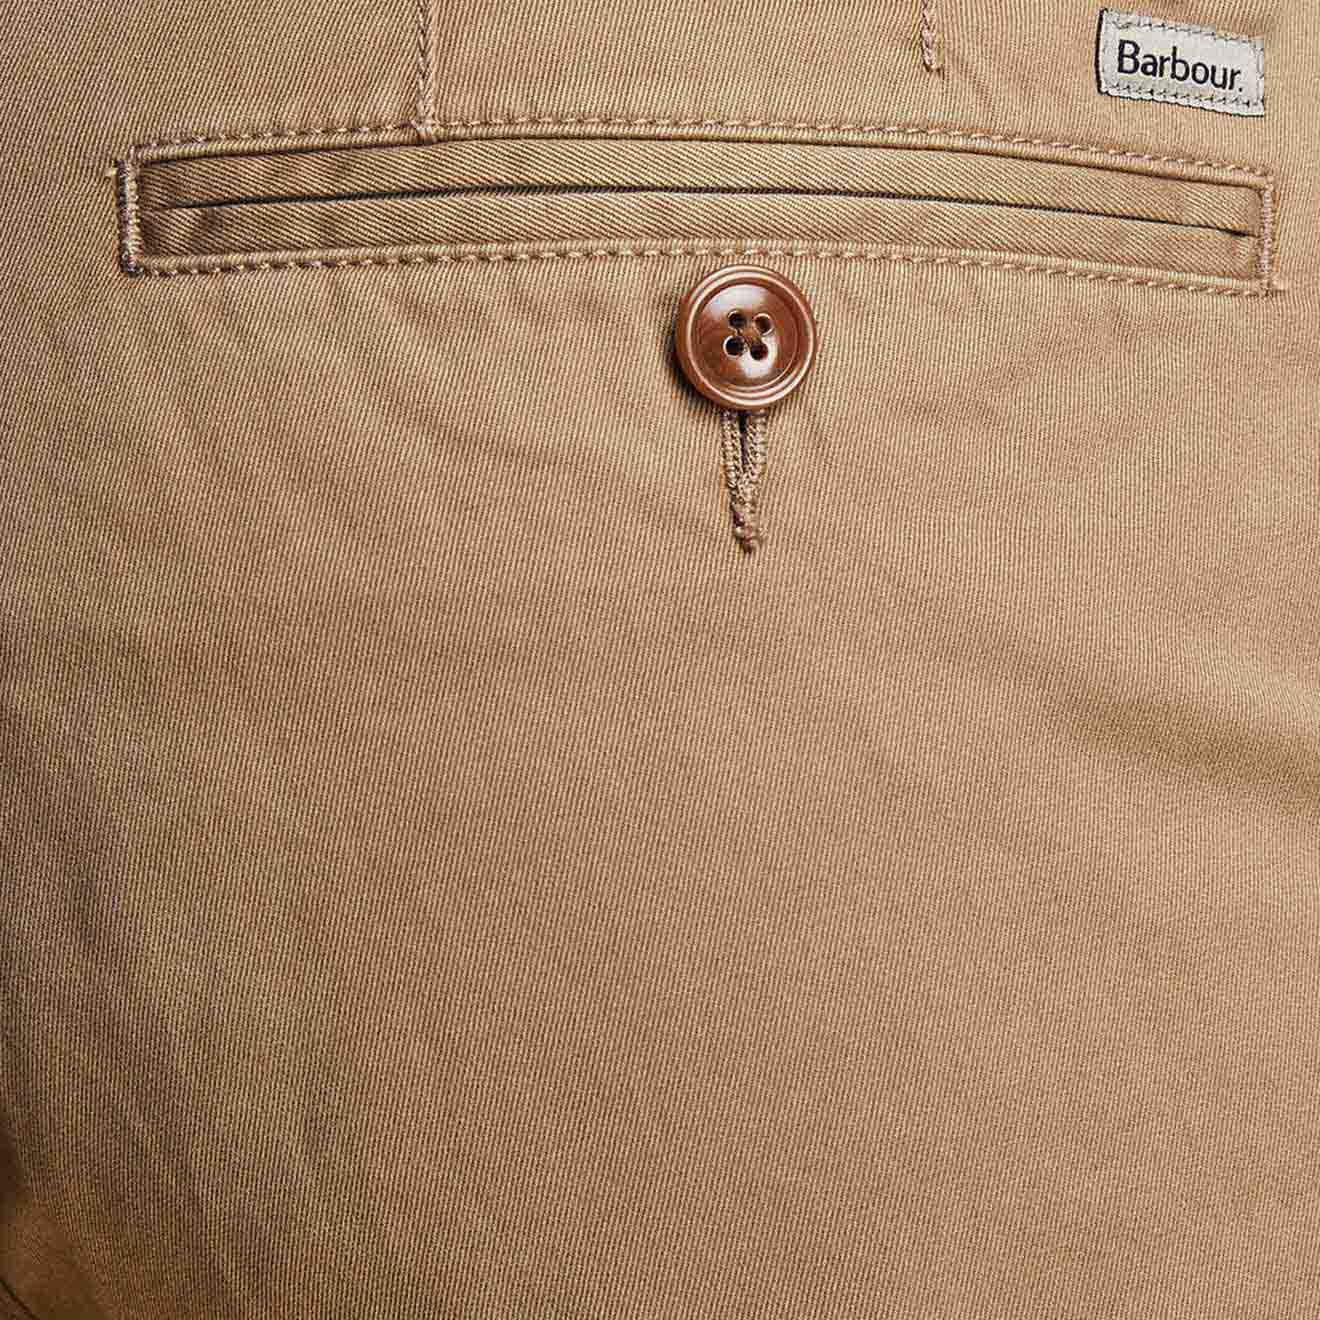 Barbour City Neuston Shorts Stone | The Sporting Lodge